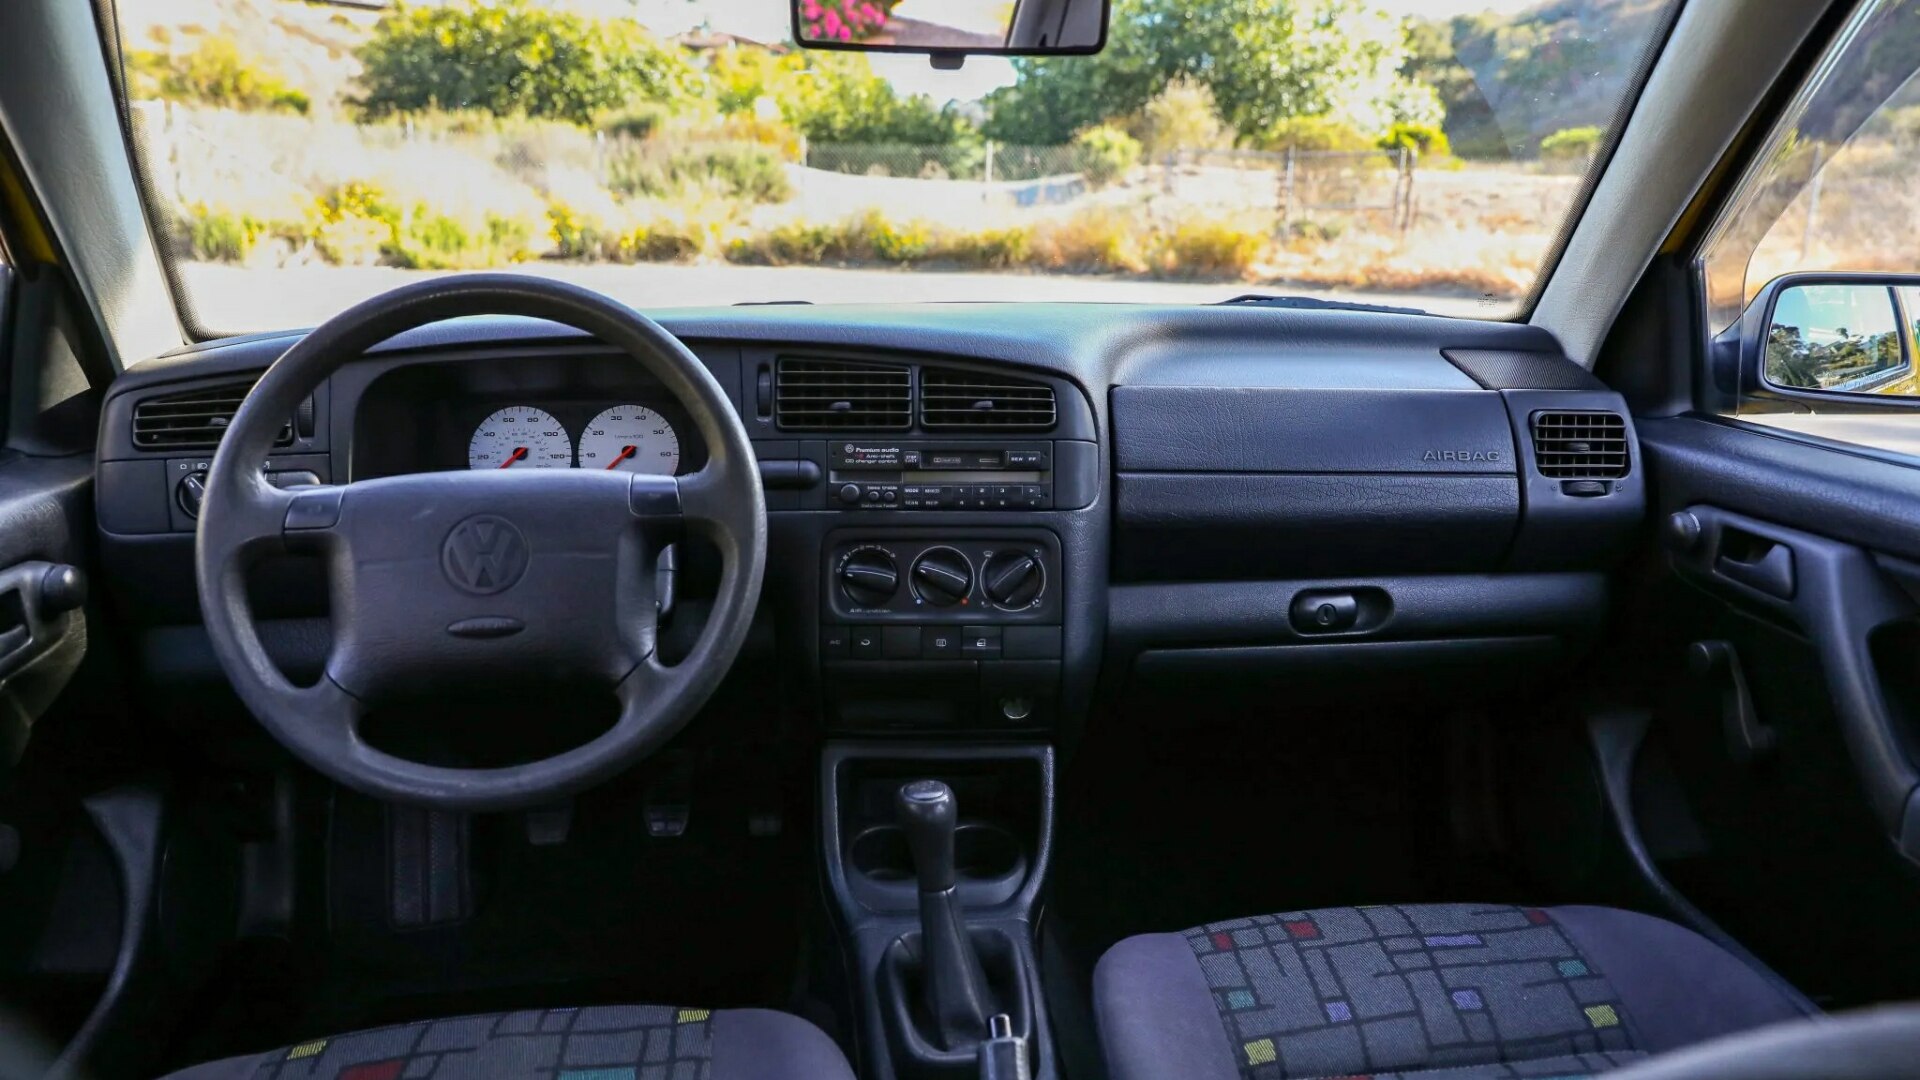 The Interior, Steering And Dashboard Of A 1996 Volkswagen Golf Harlequin (Credits Bring A Trailer)